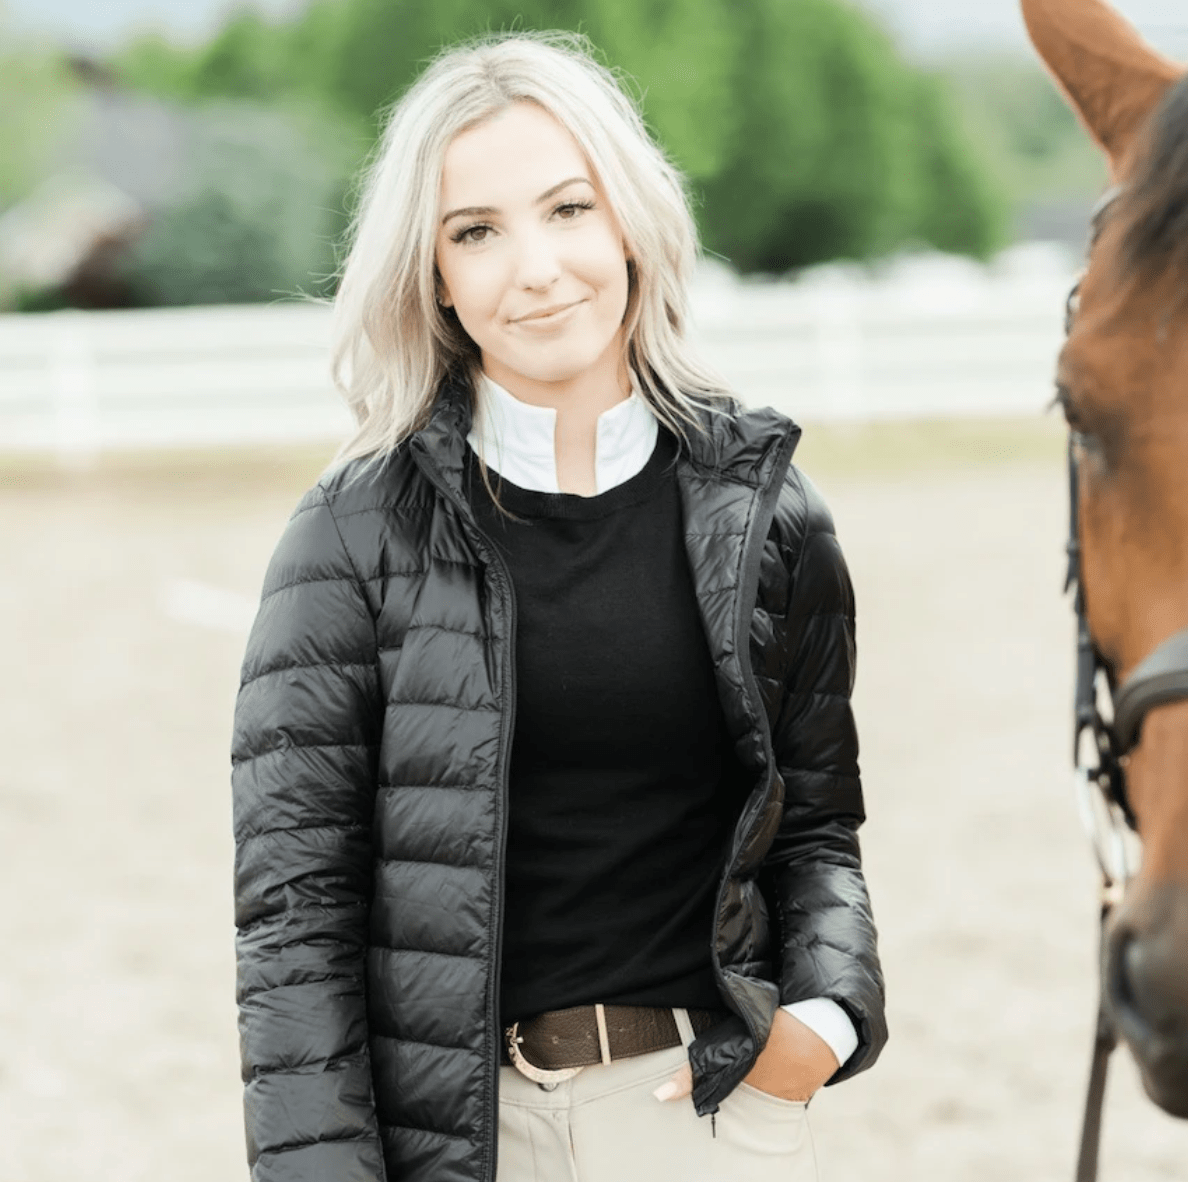 TKEQ Jacket XS EZ Packable Down Jacket- Classic Black equestrian team apparel online tack store mobile tack store custom farm apparel custom show stable clothing equestrian lifestyle horse show clothing riding clothes horses equestrian tack store